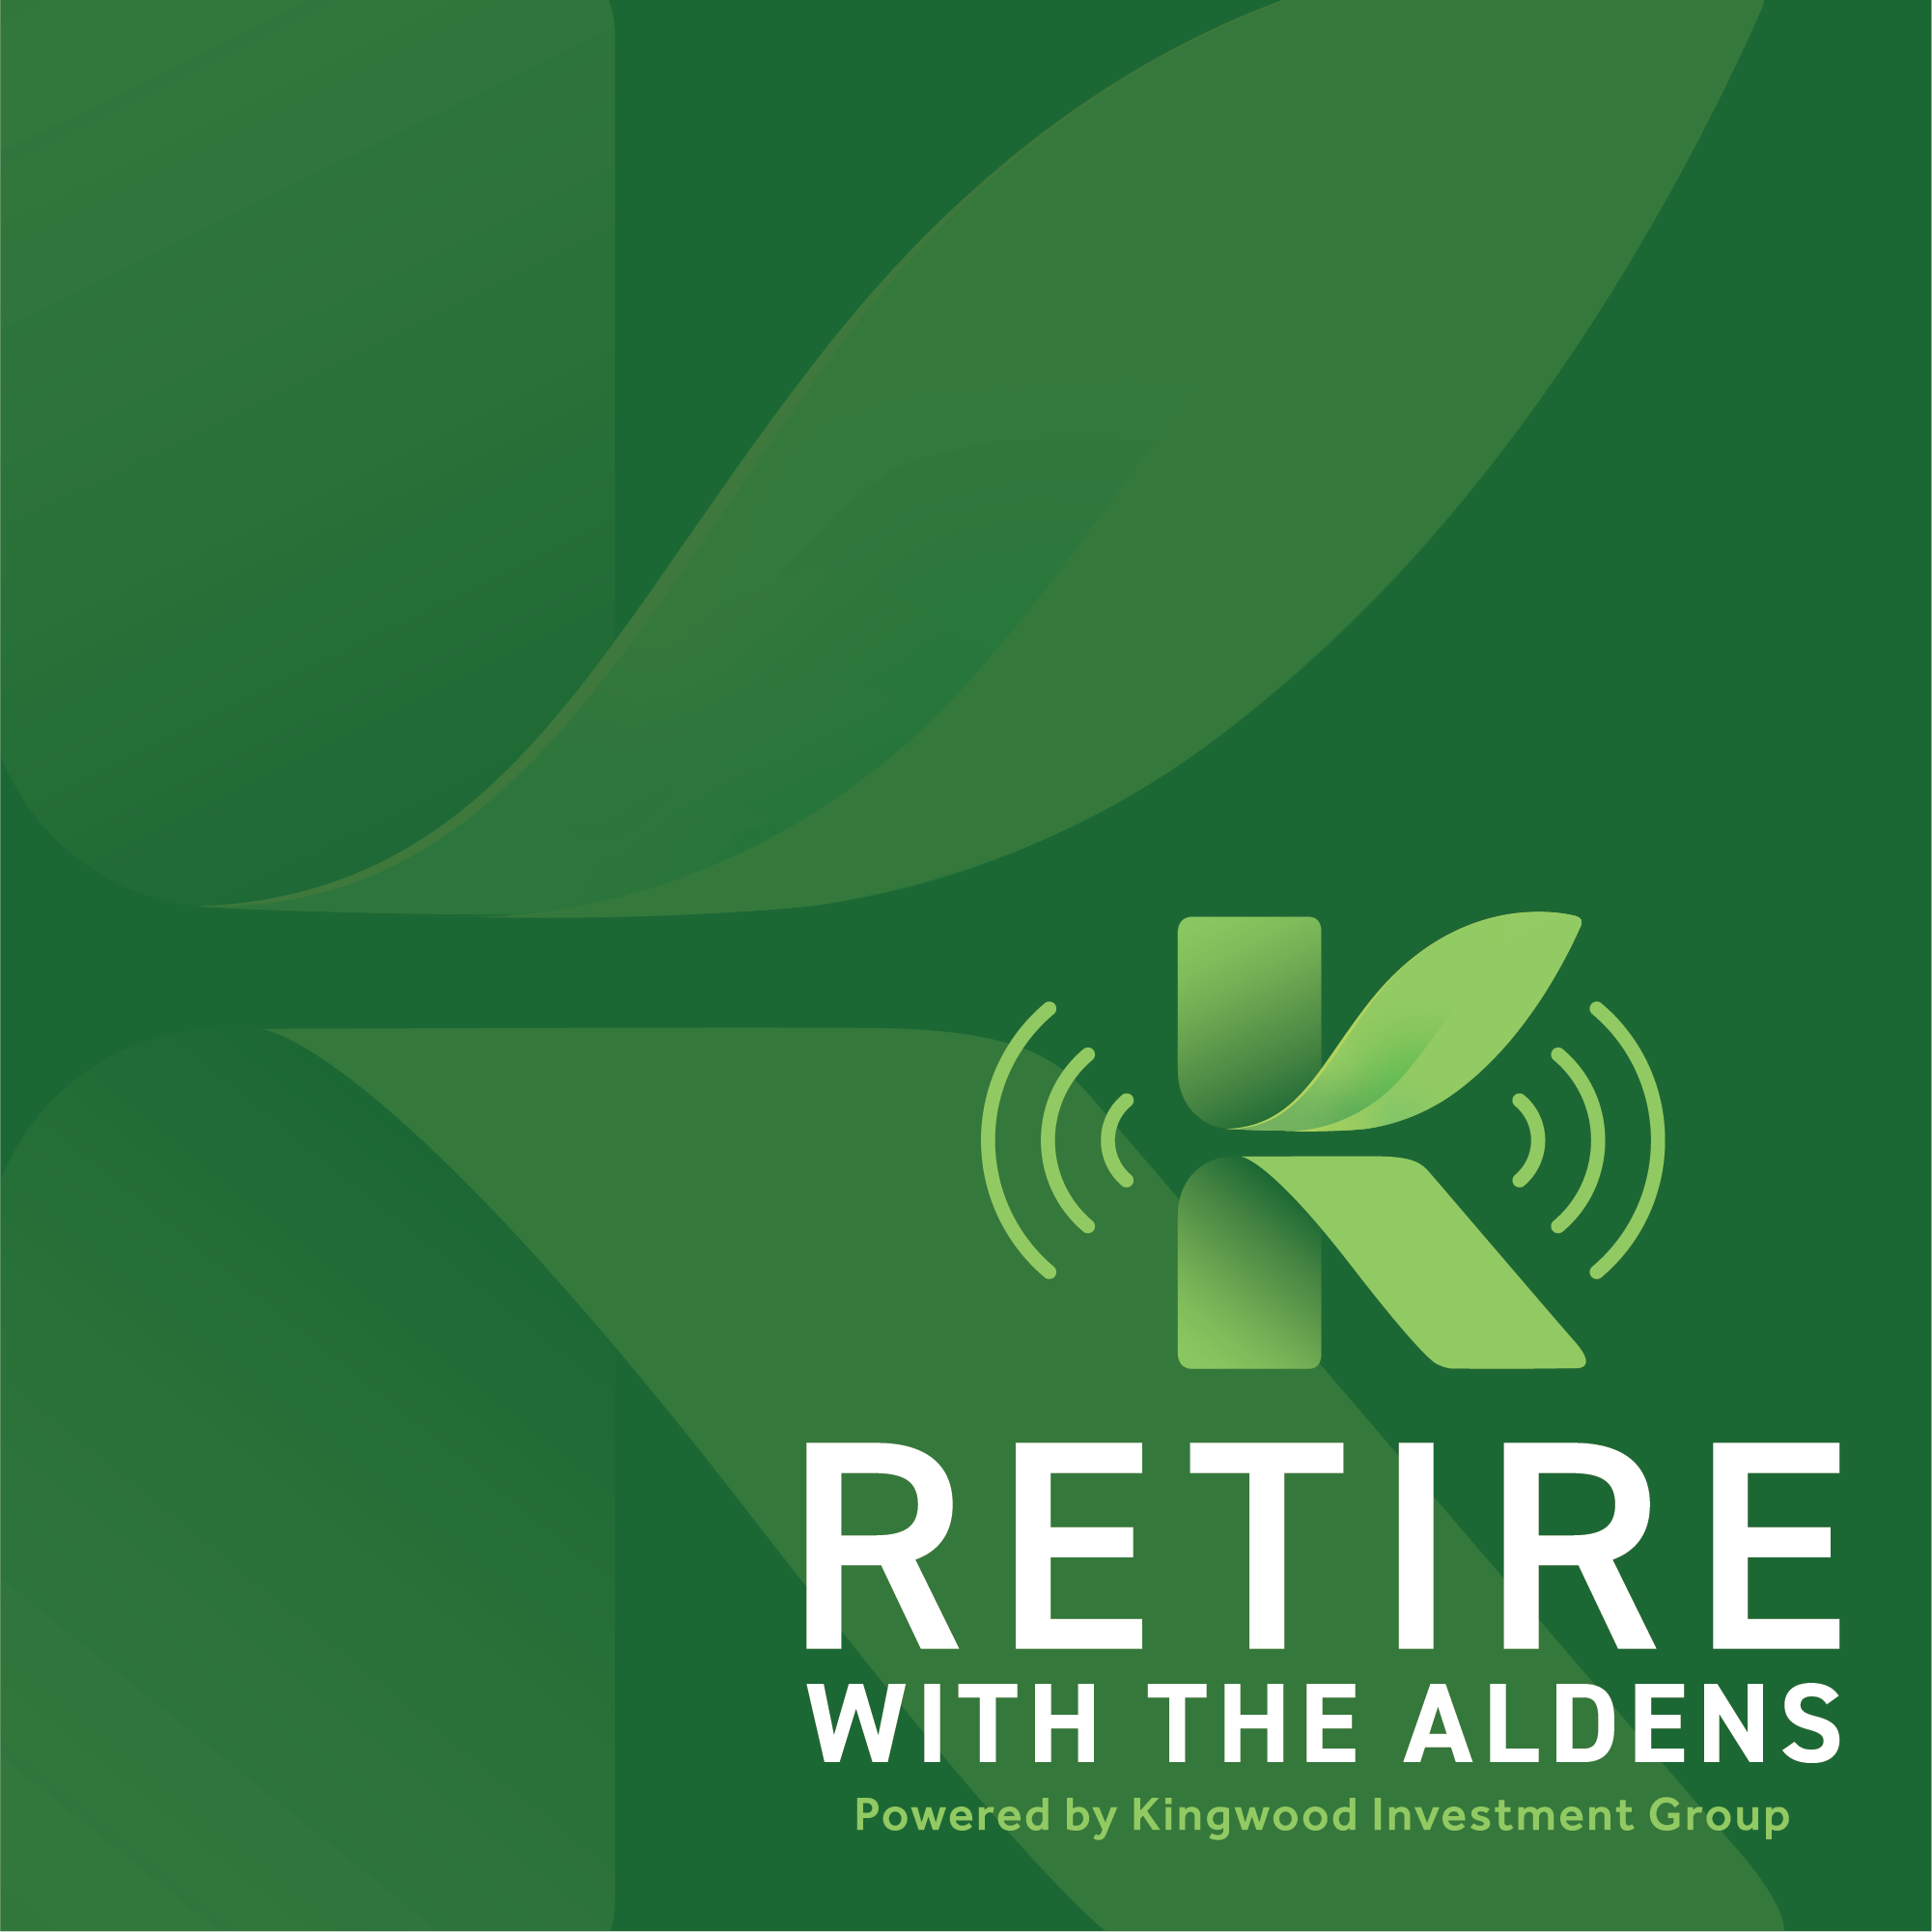 What outdated retirement strategies should we avoid?